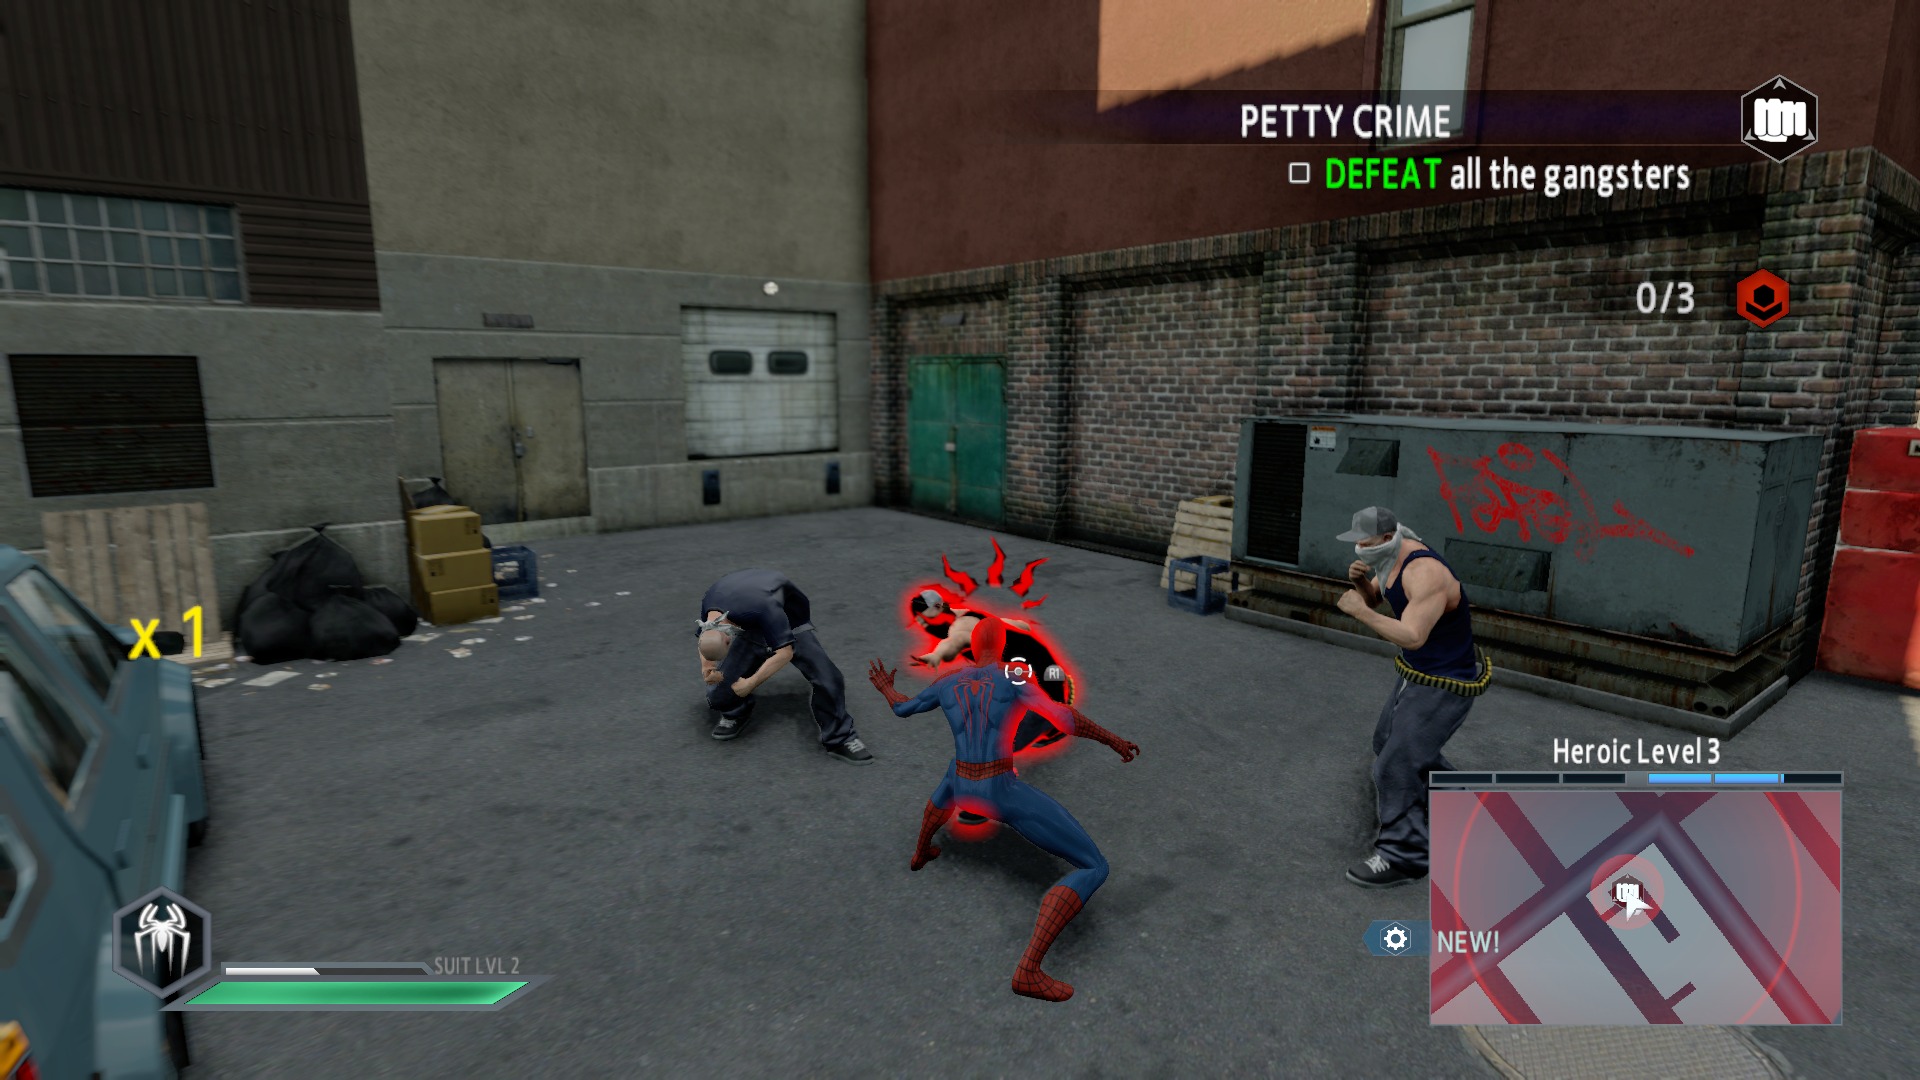 the amazing spider man 2 games pc